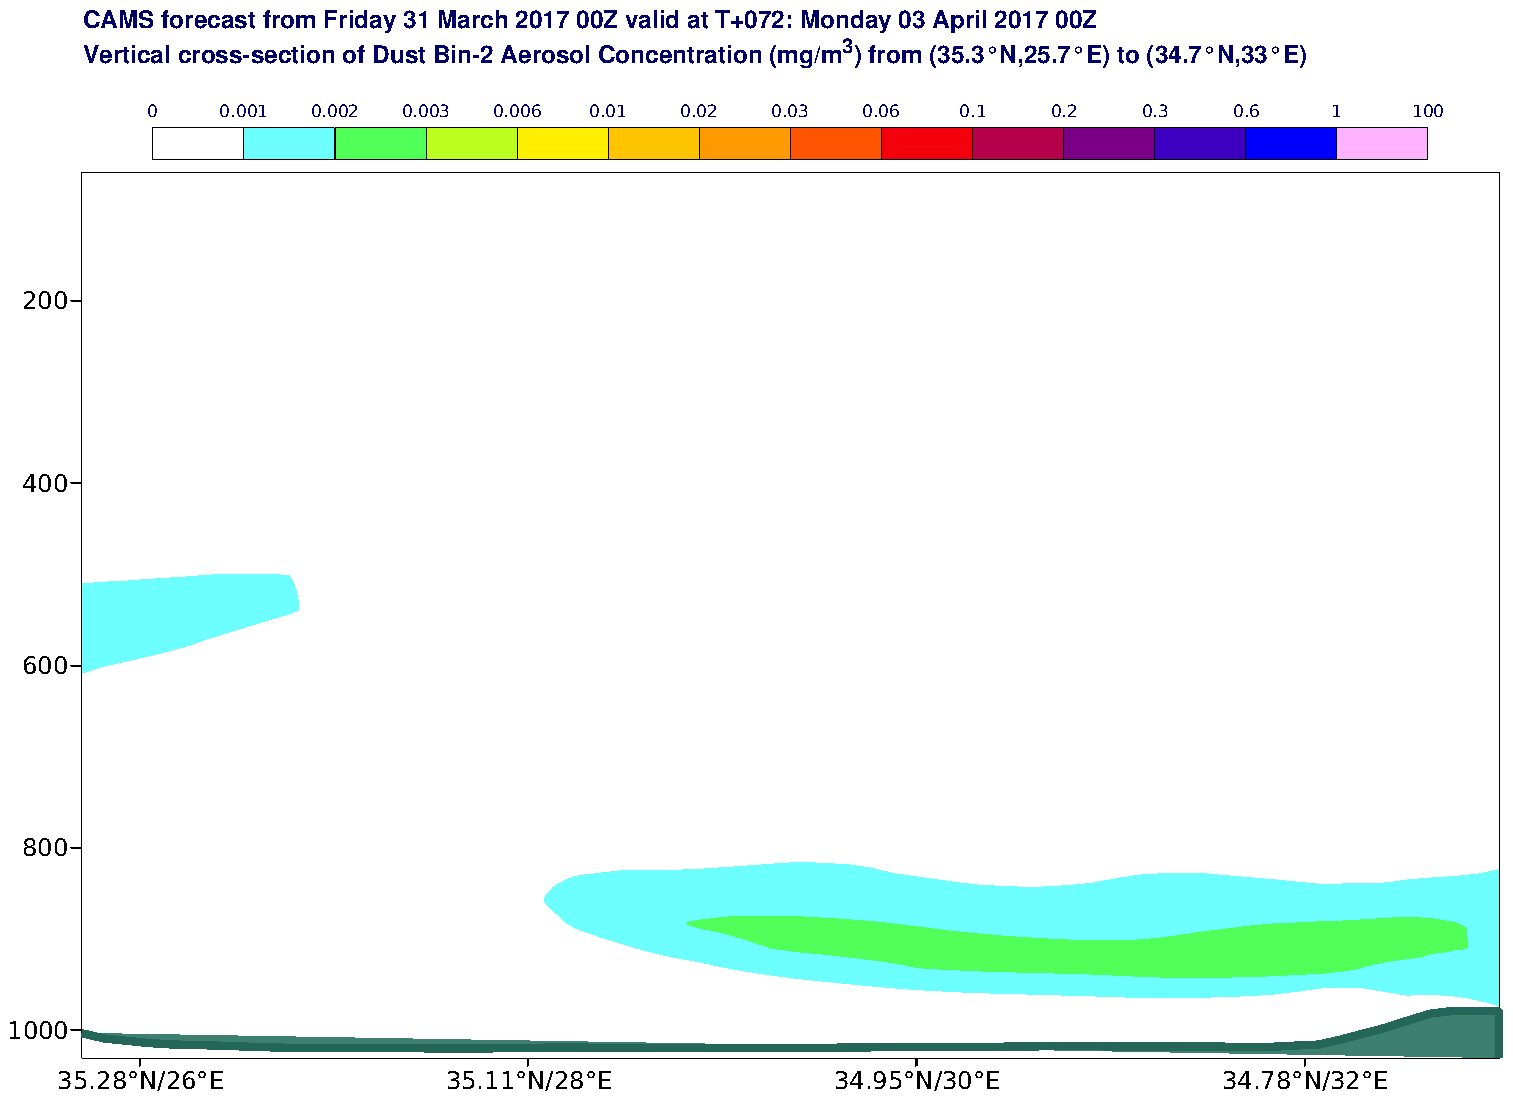 Vertical cross-section of Dust Bin-2 Aerosol Concentration (mg/m3) valid at T72 - 2017-04-03 00:00